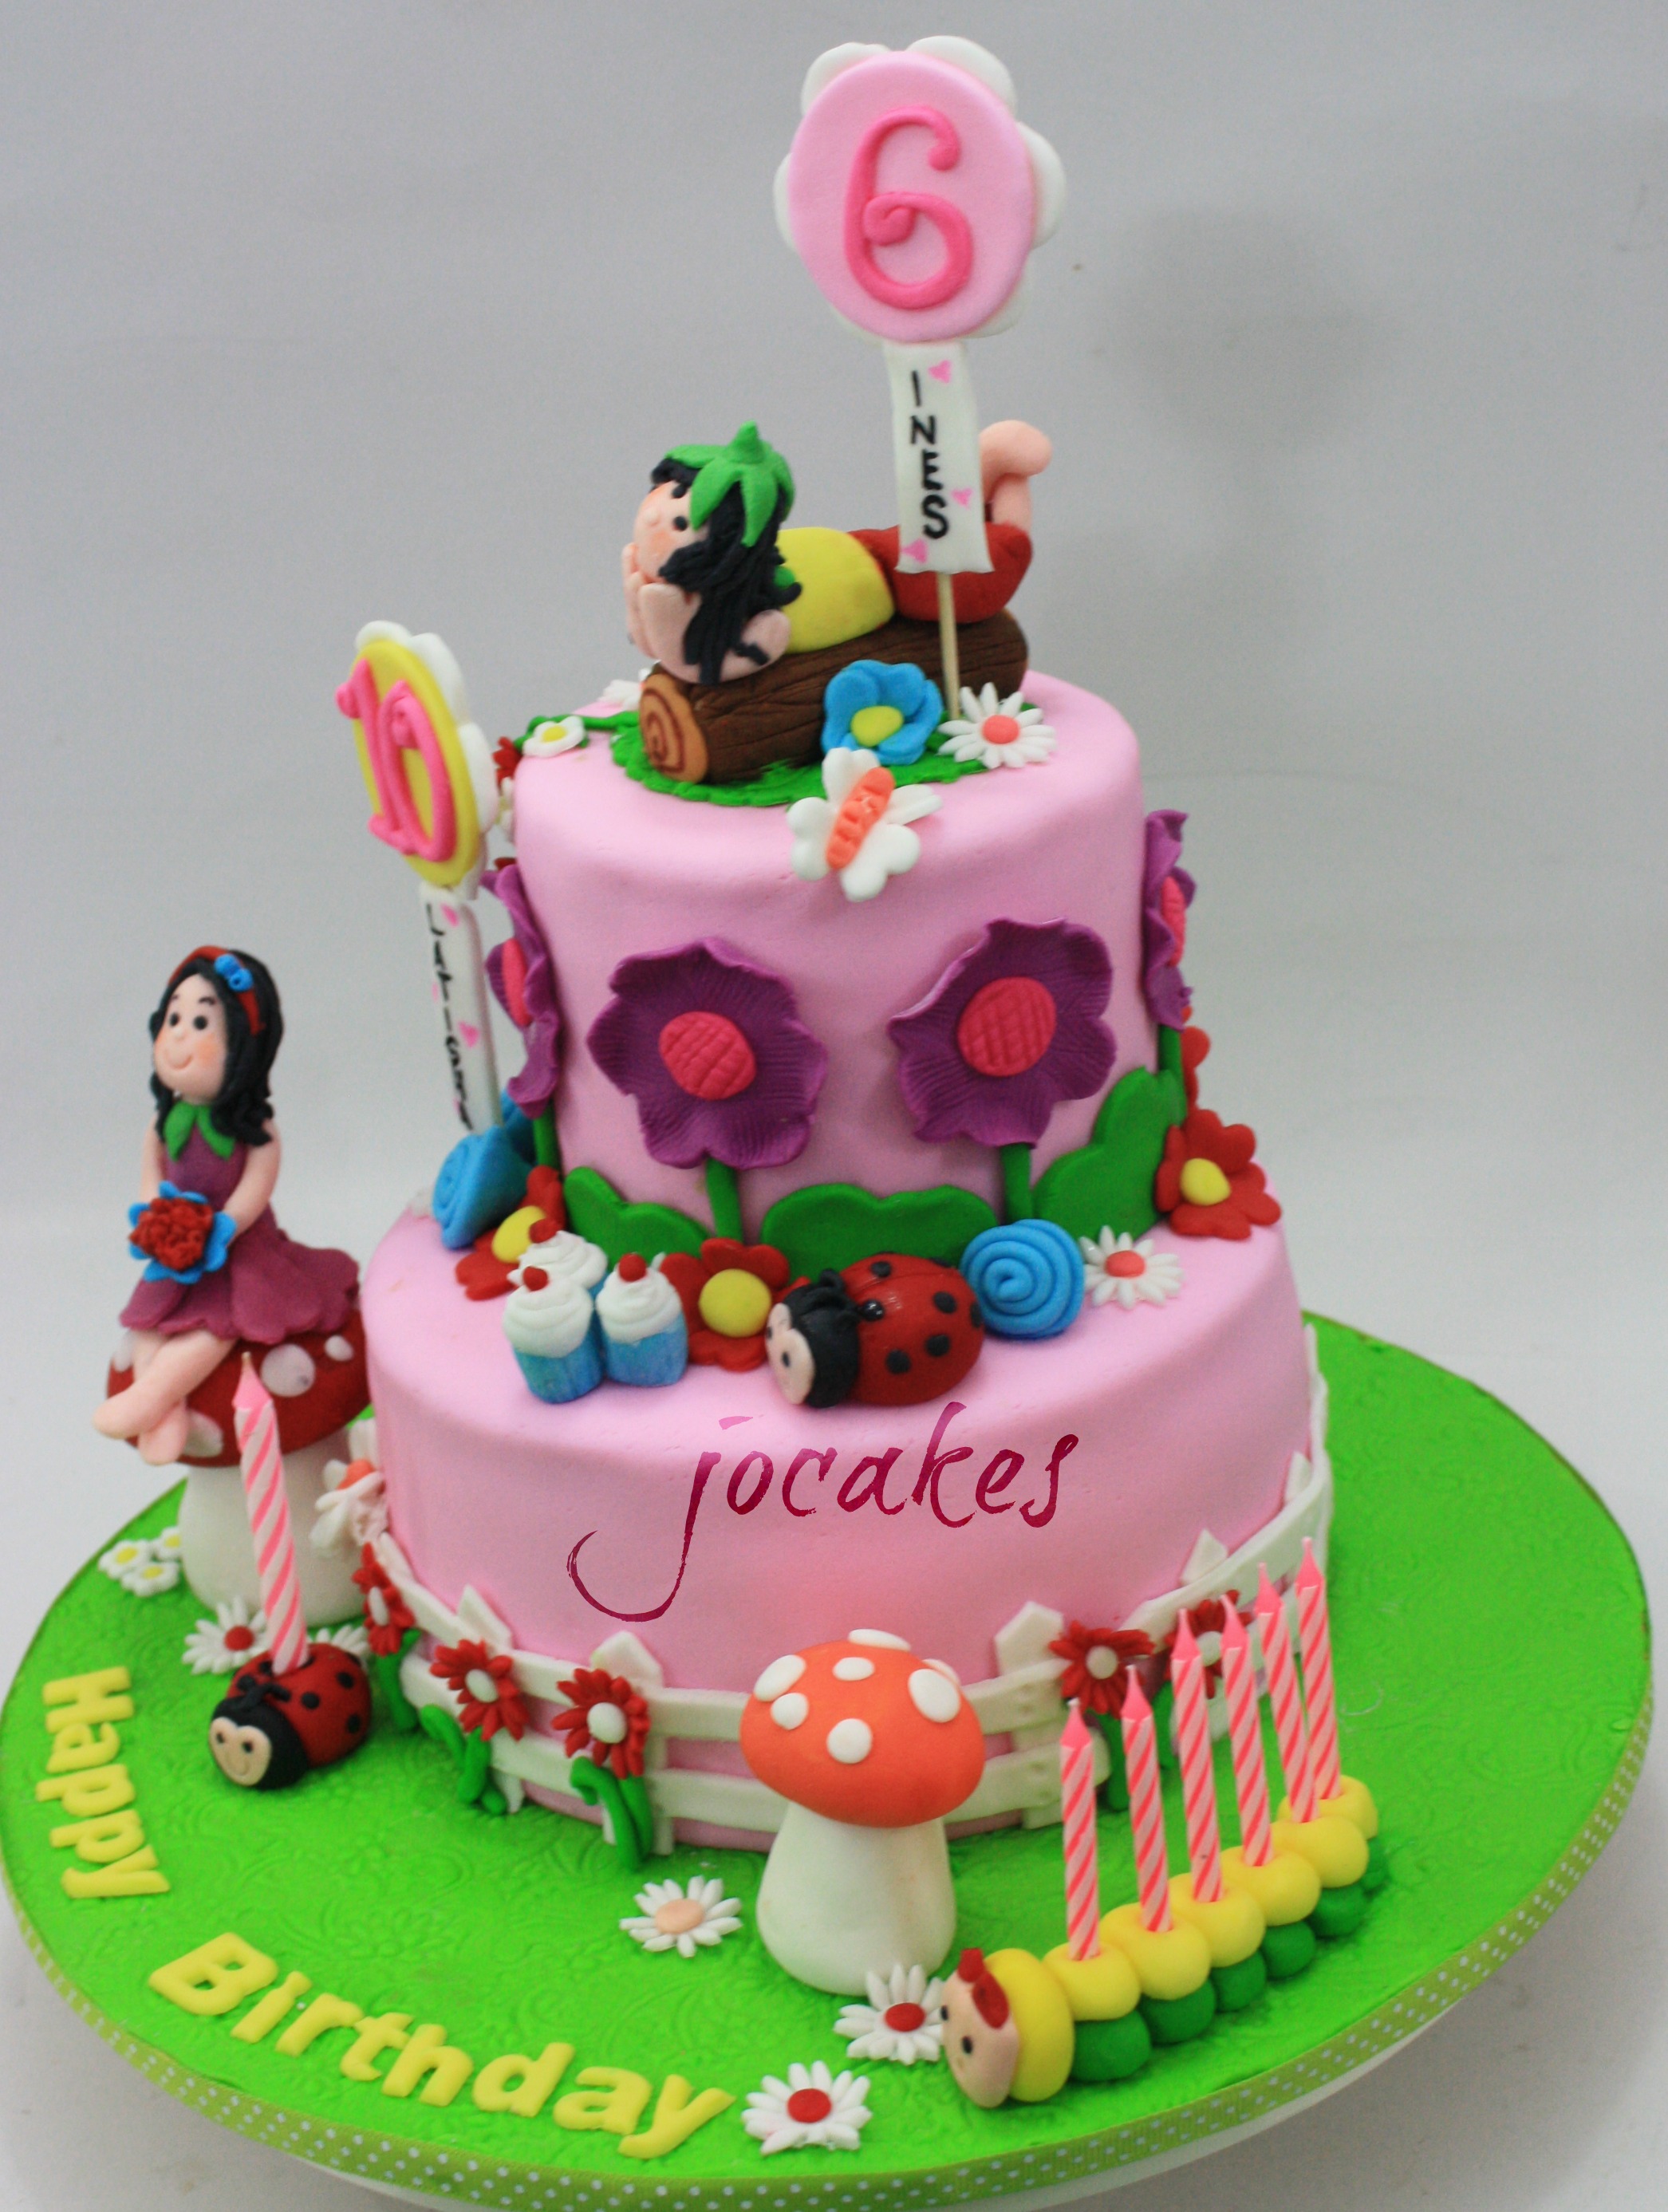 Birthday Cake For 8 Year Old Girl - CakeCentral.com